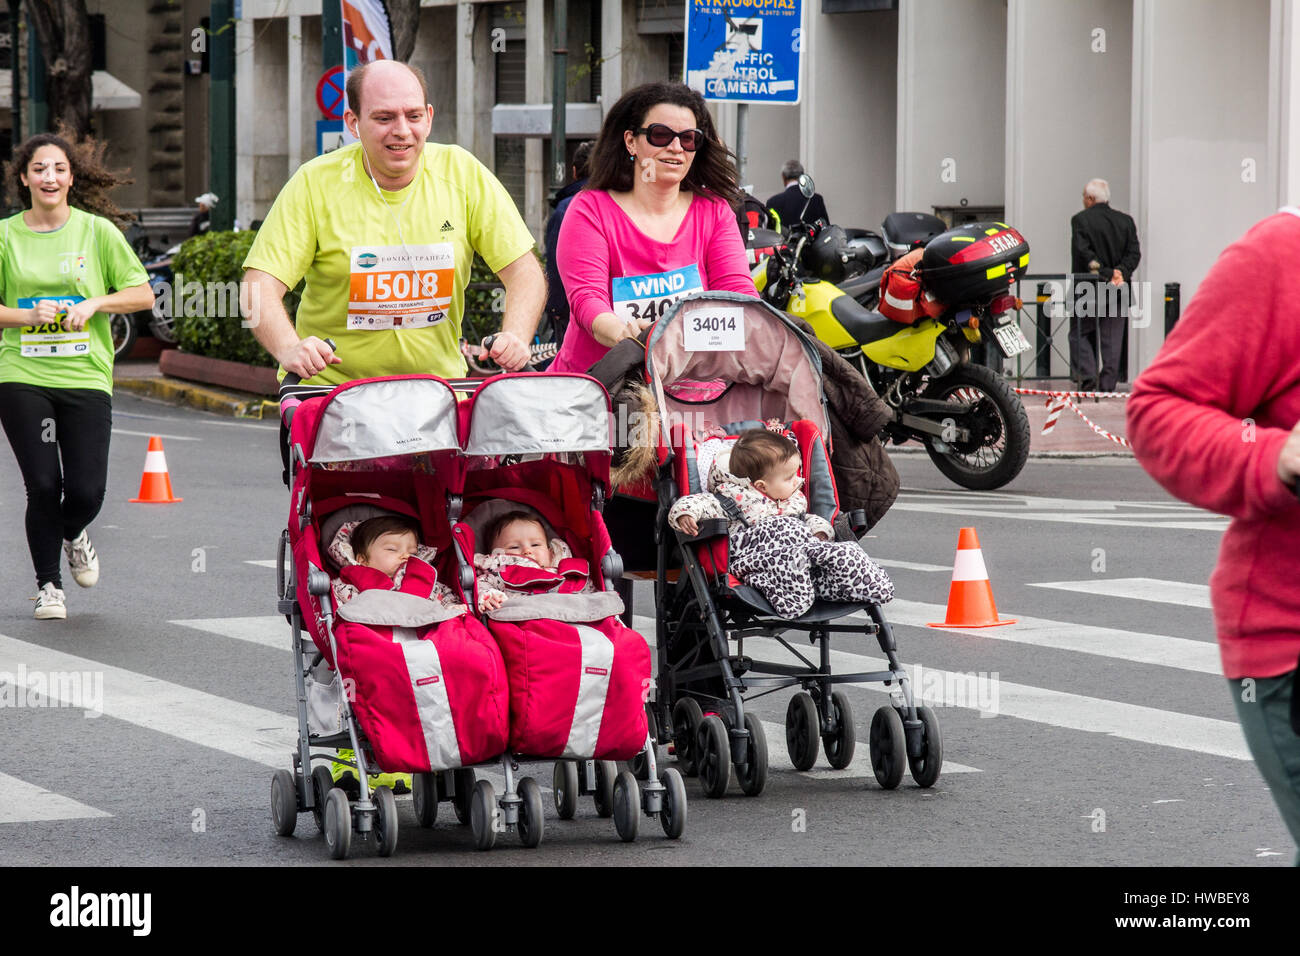 https://c8.alamy.com/comp/HWBEY8/a-man-runs-with-his-twins-babies-during-the-3km-race-in-a-festive-HWBEY8.jpg
